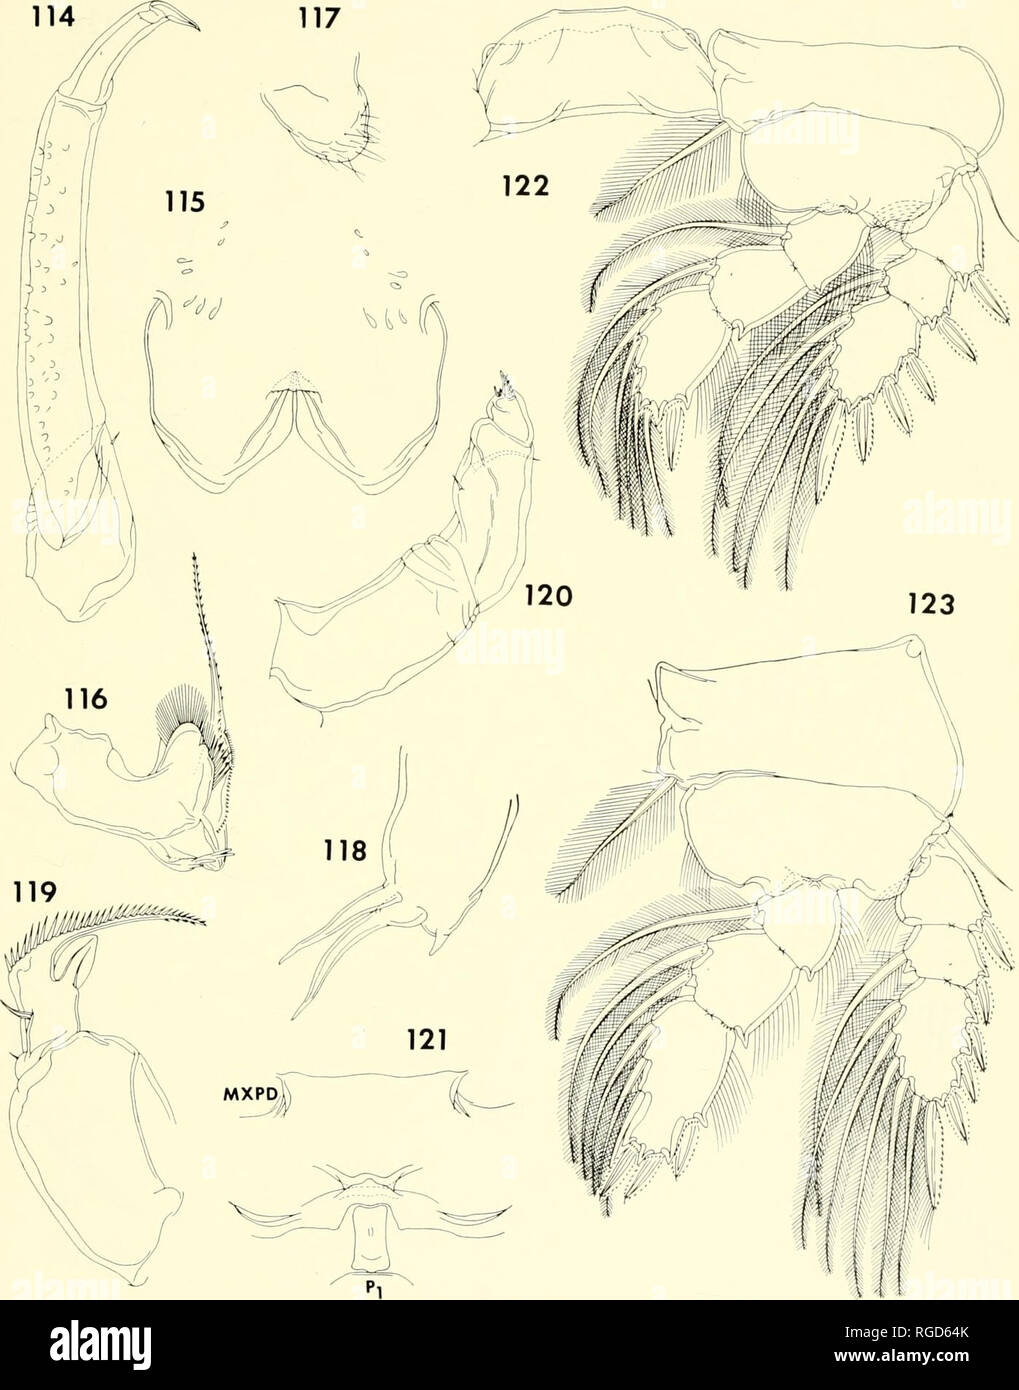 . Bulletin of the Museum of Comparative Zoology at Harvard College. Zoology. CoPEPODS FROM Corals in Madagasc:ah • Humes and Ho 397. Figures 114-123. Lichomolgus lobophorus n. sp., female (continued). 114, second antenna, outer (E); 115, labrum, ventral (D); 116, mandible, posterior (D); 117, paragnath, ventral (C); 118, first maxilla, posterior (C]; 119, second maxilla, pos- terior, (D); 120, maxilliped, anterior (D); 121, postoral area, ventral (H); 122, leg 1 and intercoxal plate, anterior (E); 123, leg 2, anterior (E).. Please note that these images are extracted from scanned page images t Stock Photo